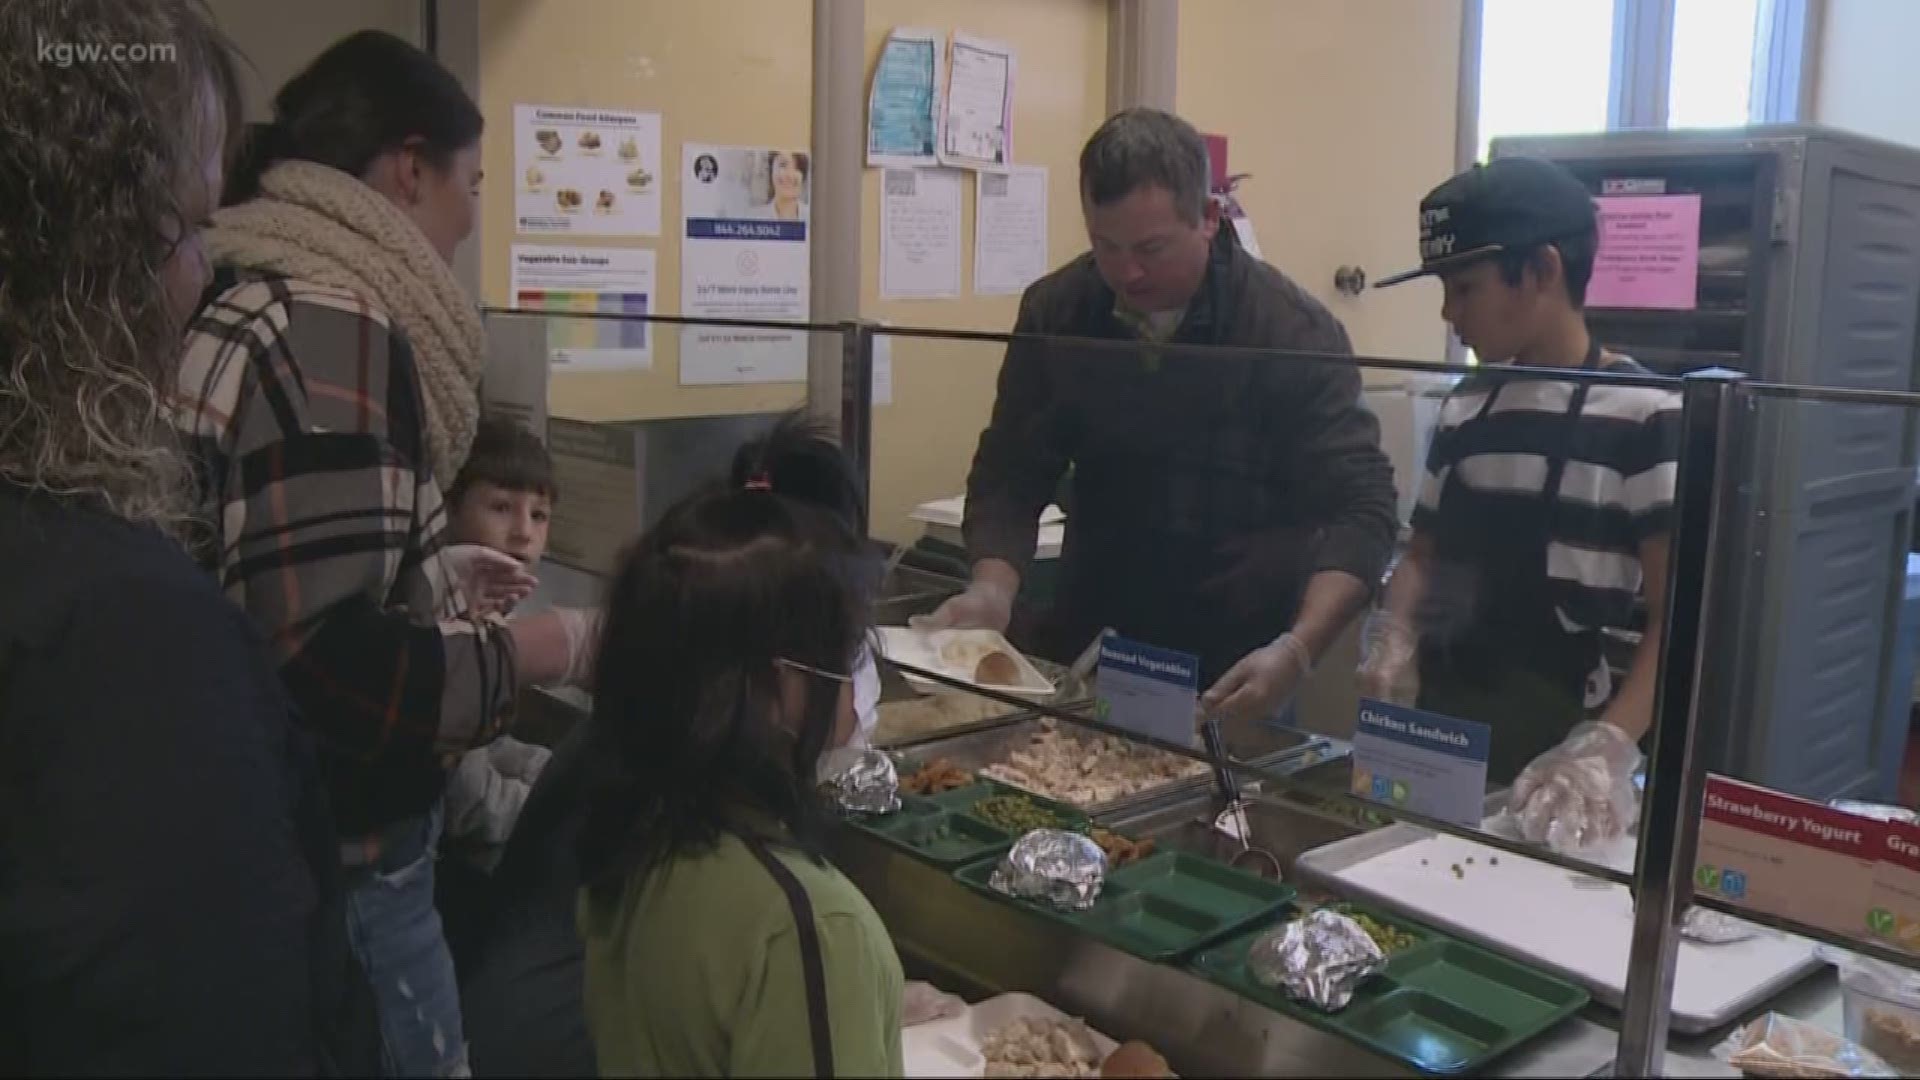 Portland Public Schools made a healthy and local meal for students before the holiday.